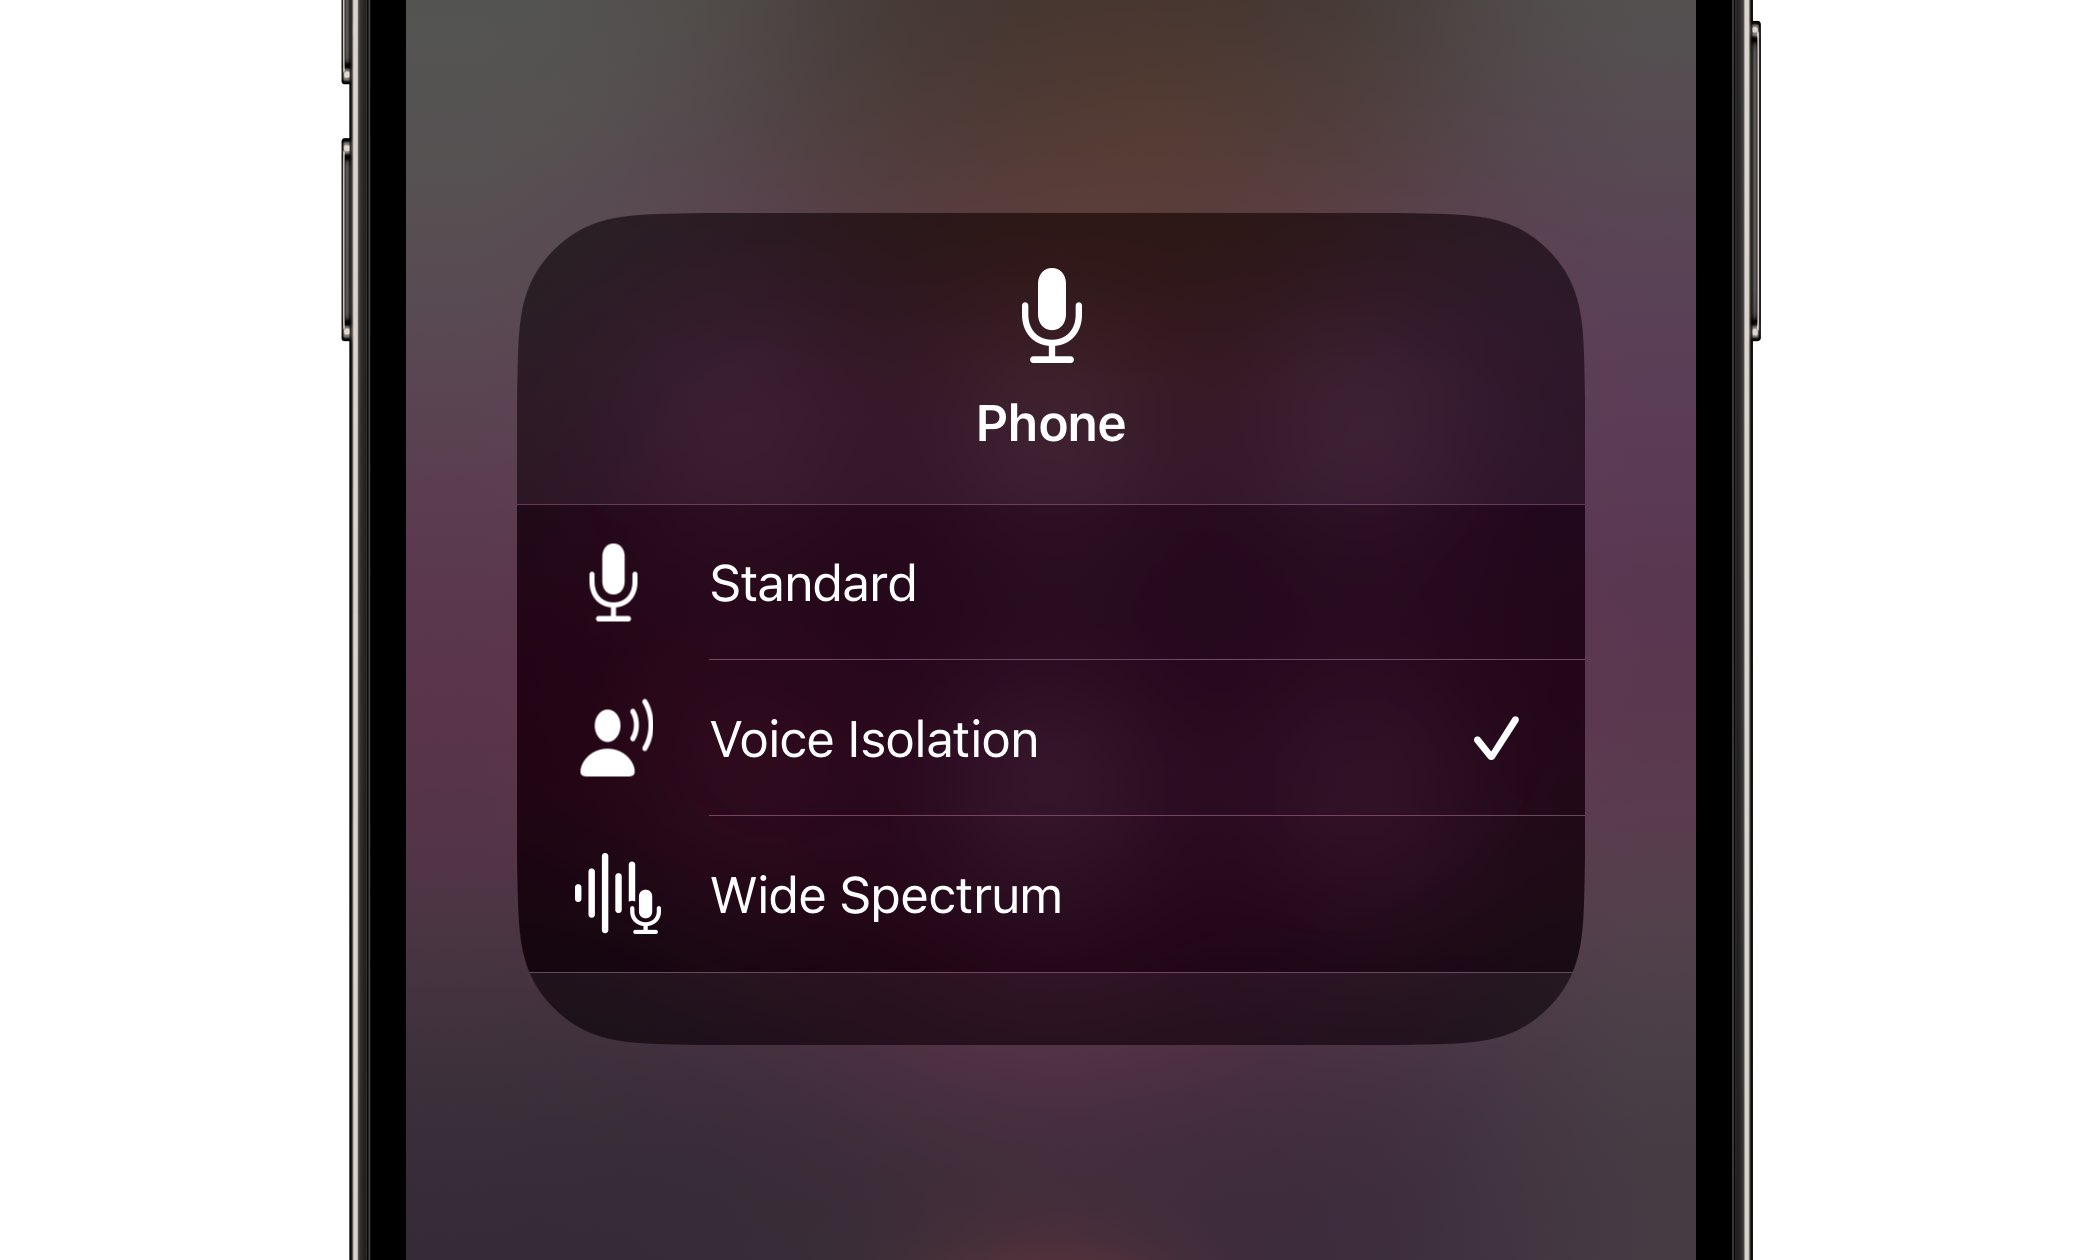 How to enable voice isolation to improve call quality on iPhone